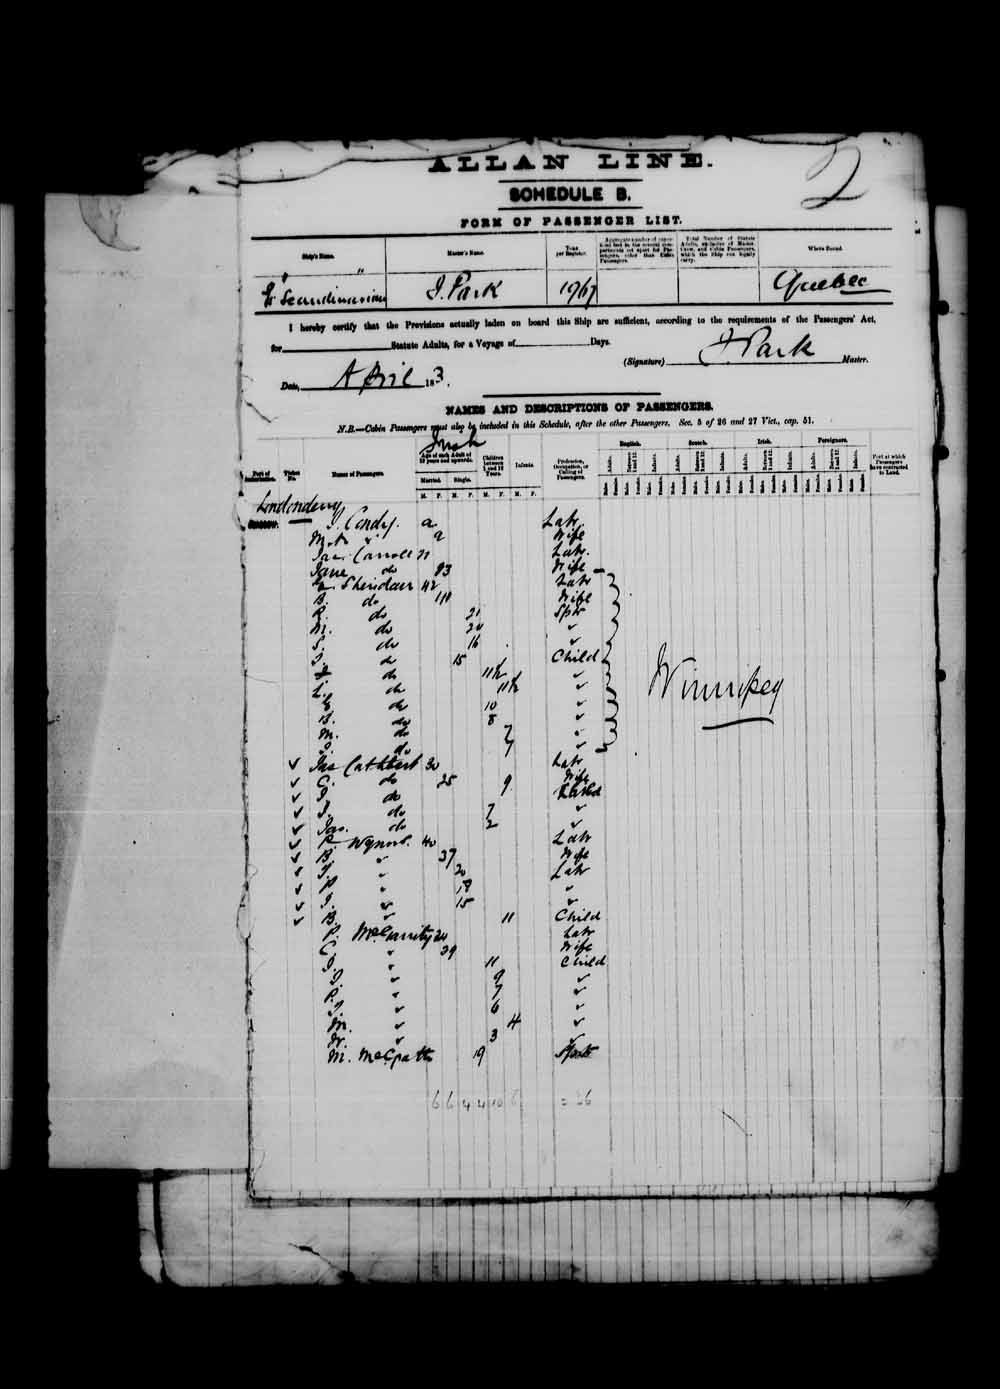 Digitized page of Passenger Lists for Image No.: e003542669